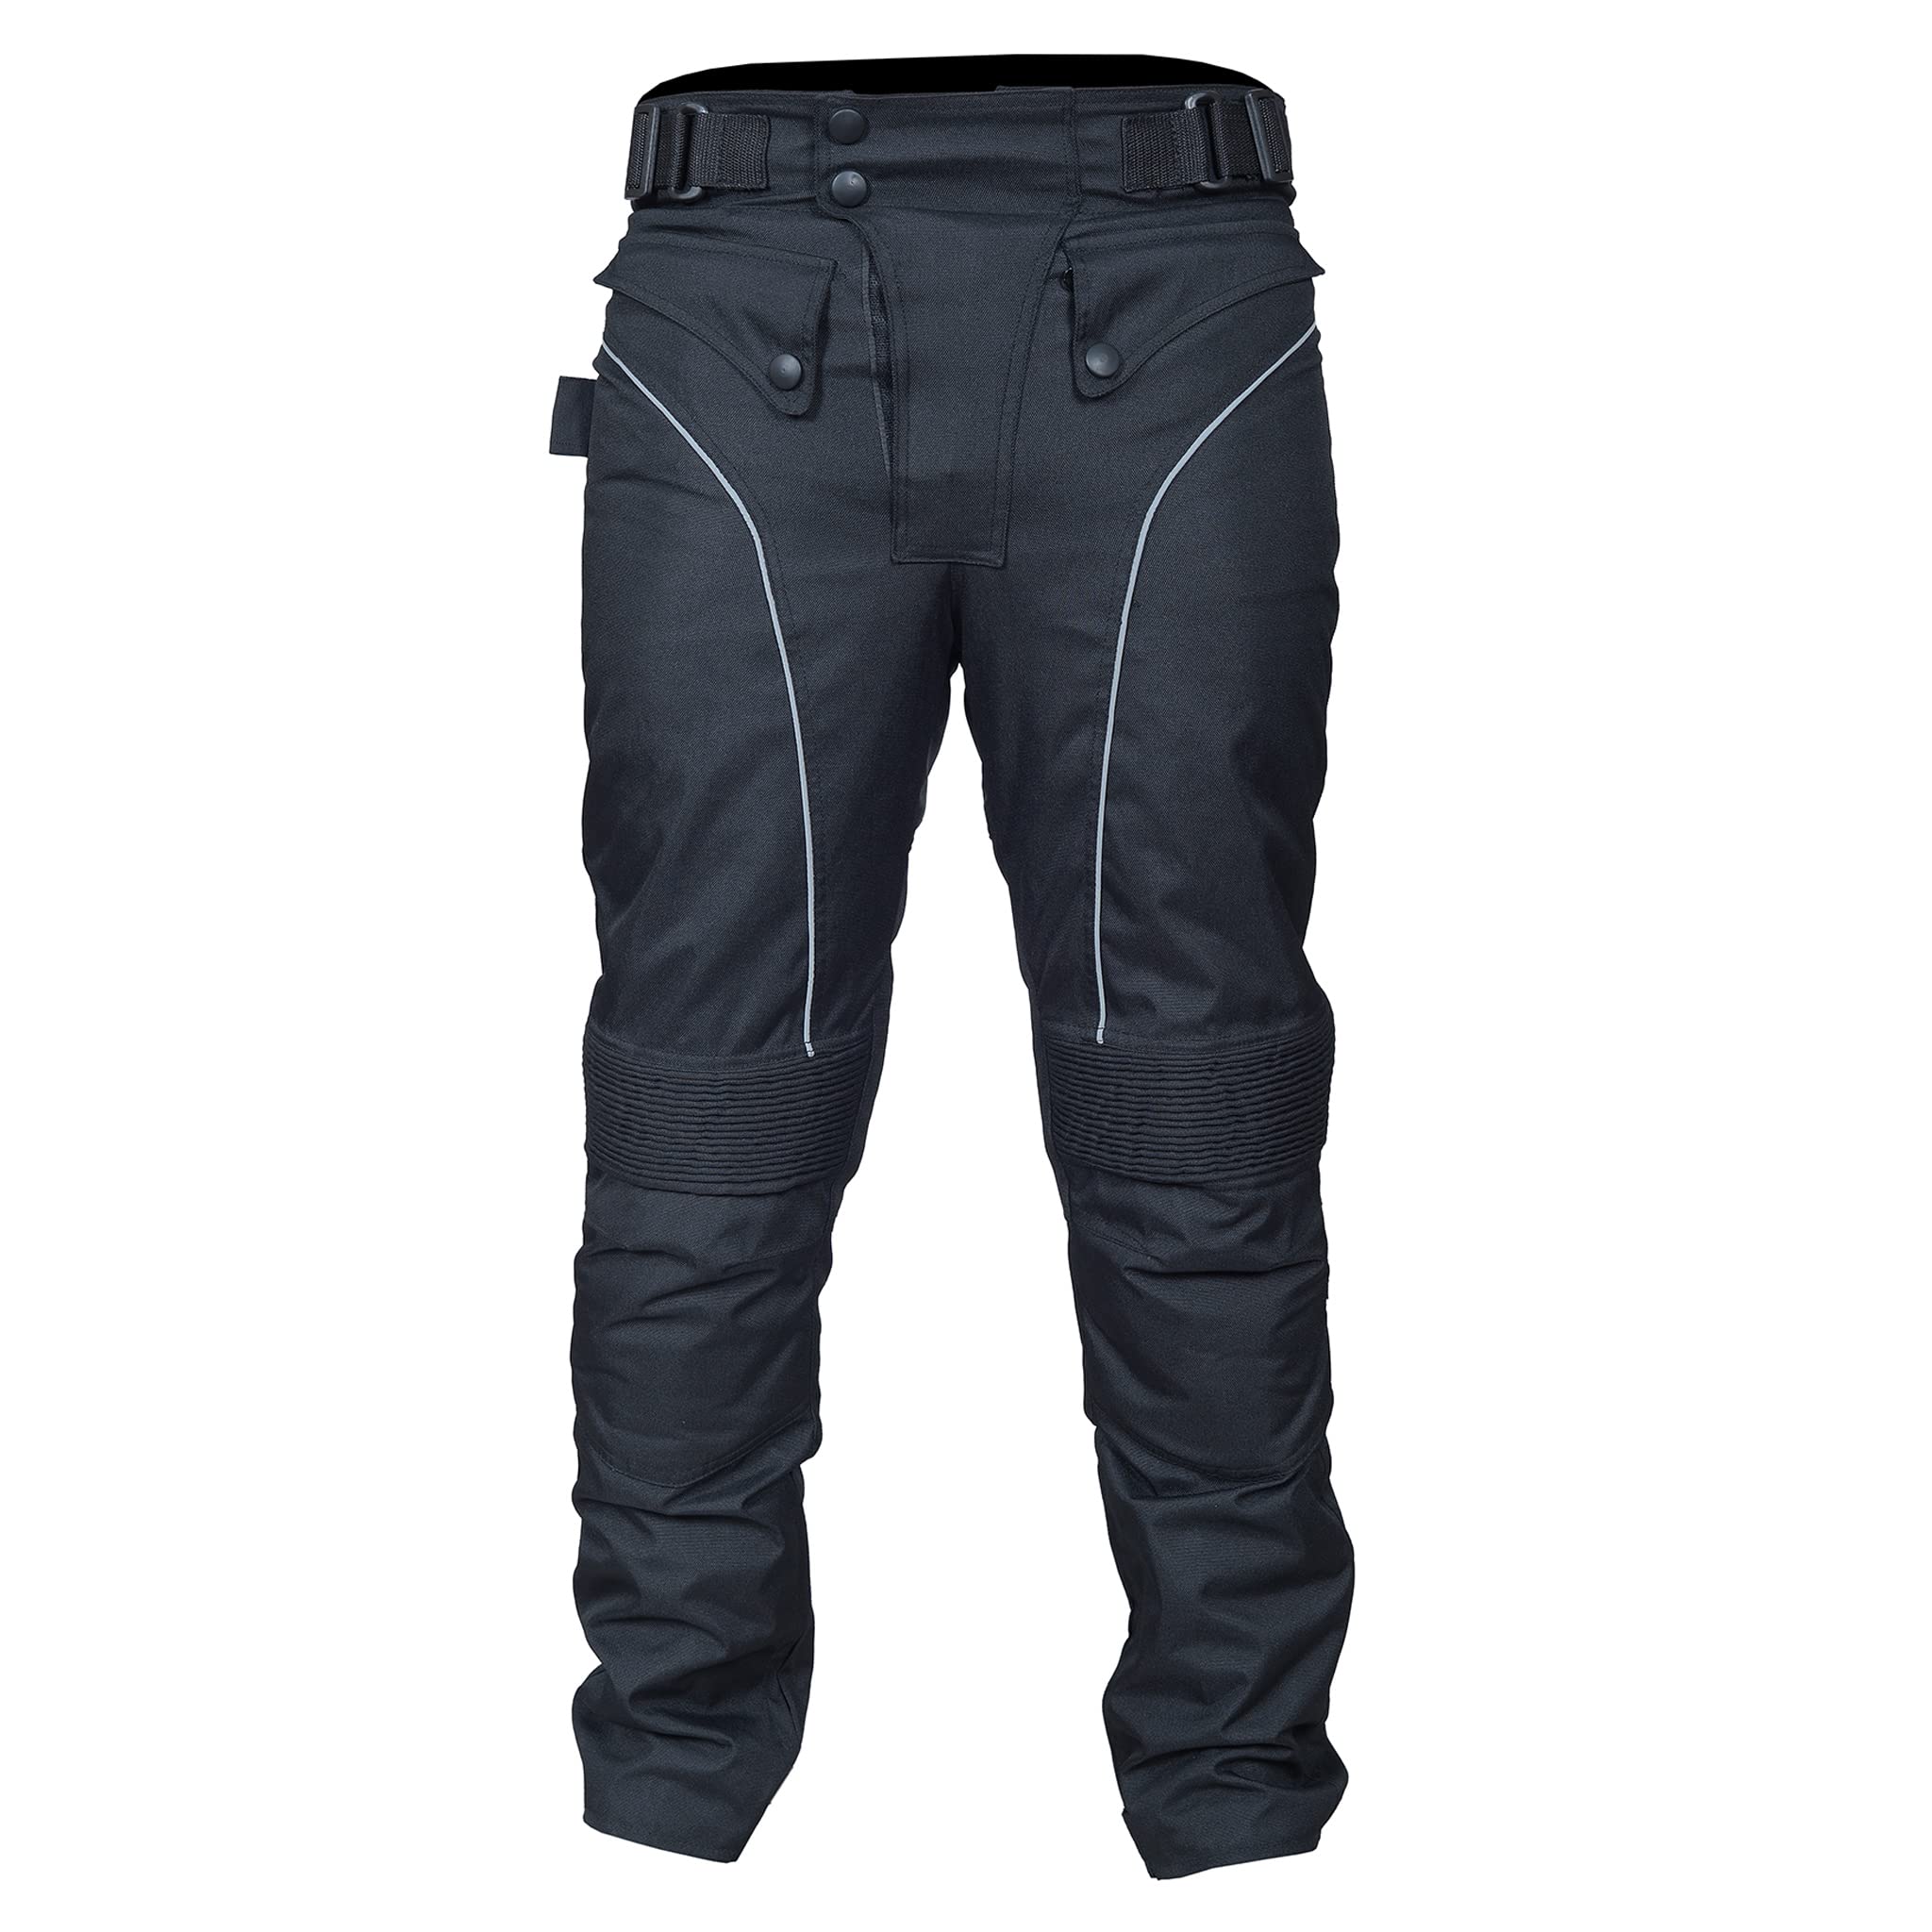 Xelement B7466 Men's 'The Racer' Black Cowhide Leather Racing Pants with X- Armor Protection 30 - Walmart.com